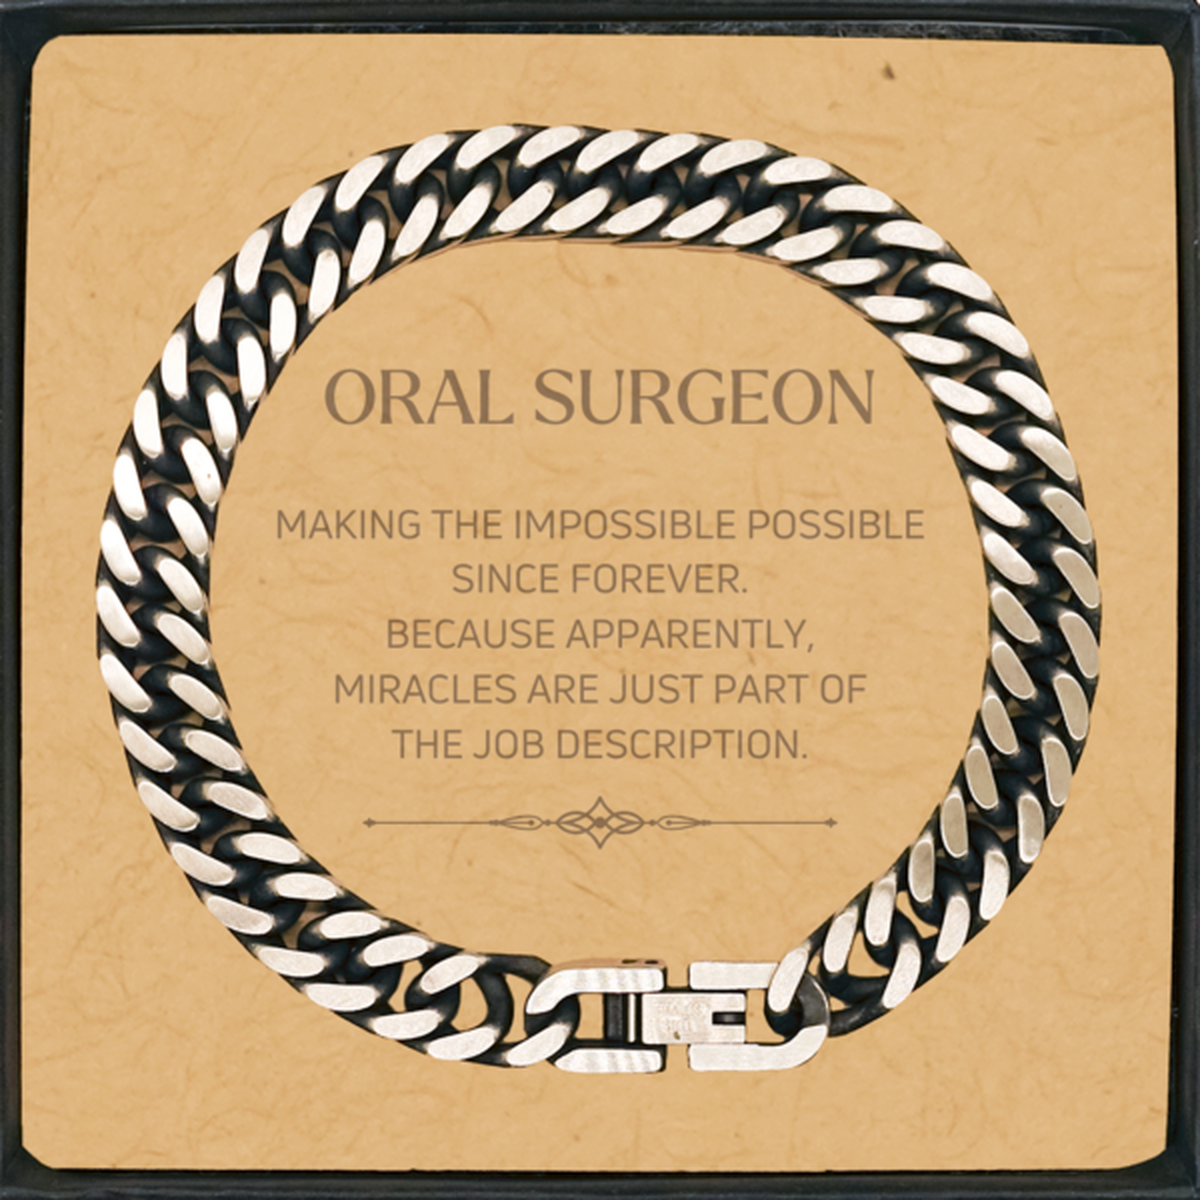 Funny Oral Surgeon Gifts, Miracles are just part of the job description, Inspirational Birthday Cuban Link Chain Bracelet For Oral Surgeon, Men, Women, Coworkers, Friends, Boss